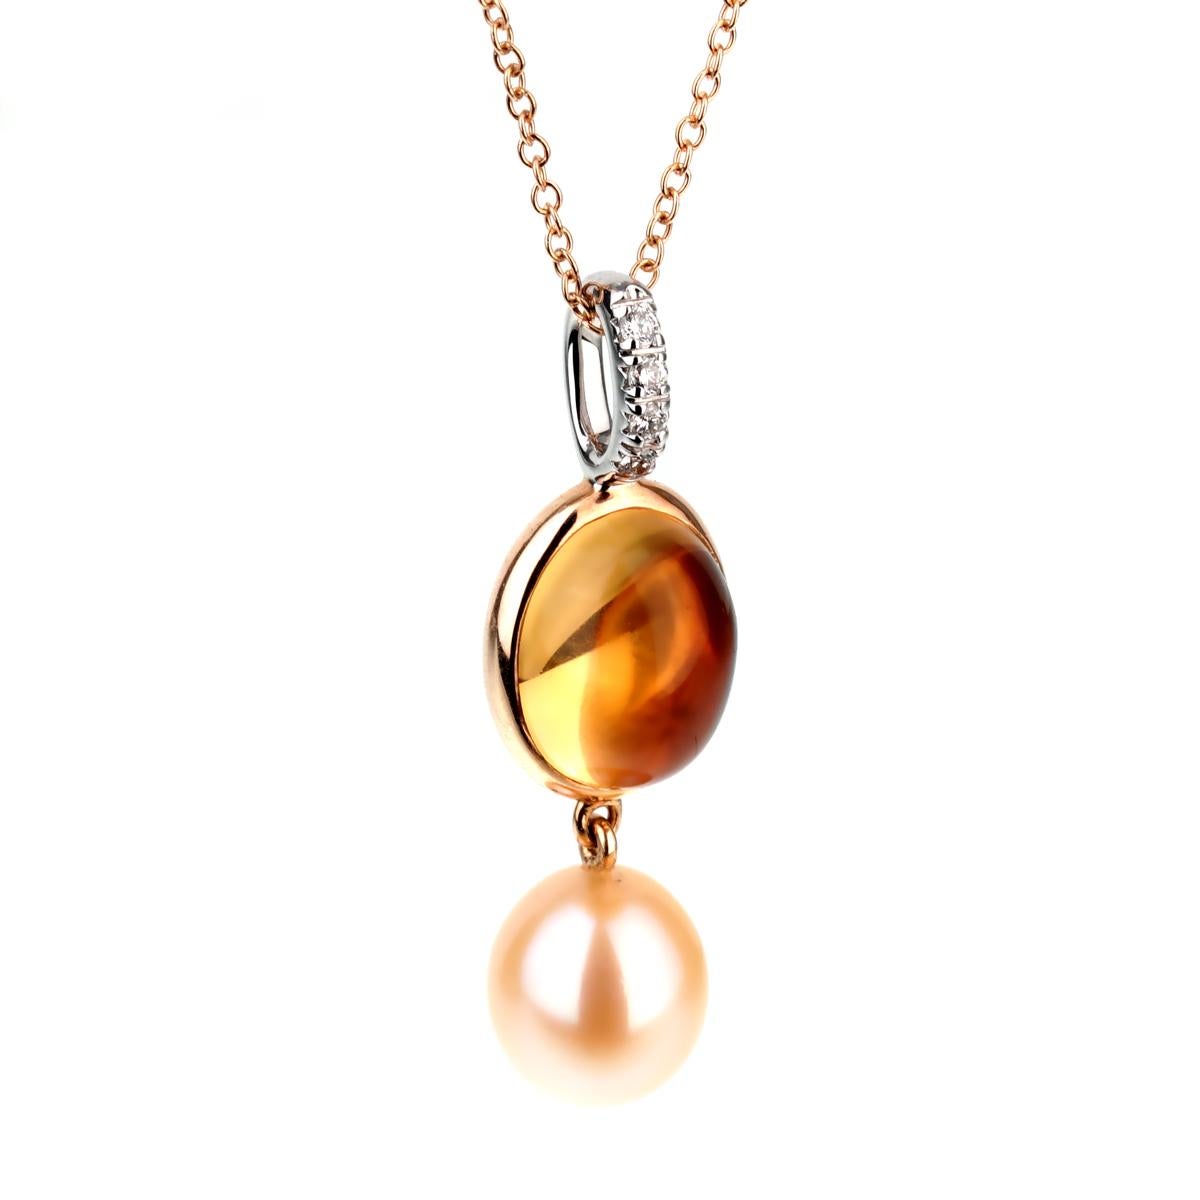 A fabulous drop necklace by Mimi Milano featuring a 3.30 ct citrine followed by a 7.5x8mm pink cultured pearl adorned by round brilliant cut diamonds in 18k white and rose gold.